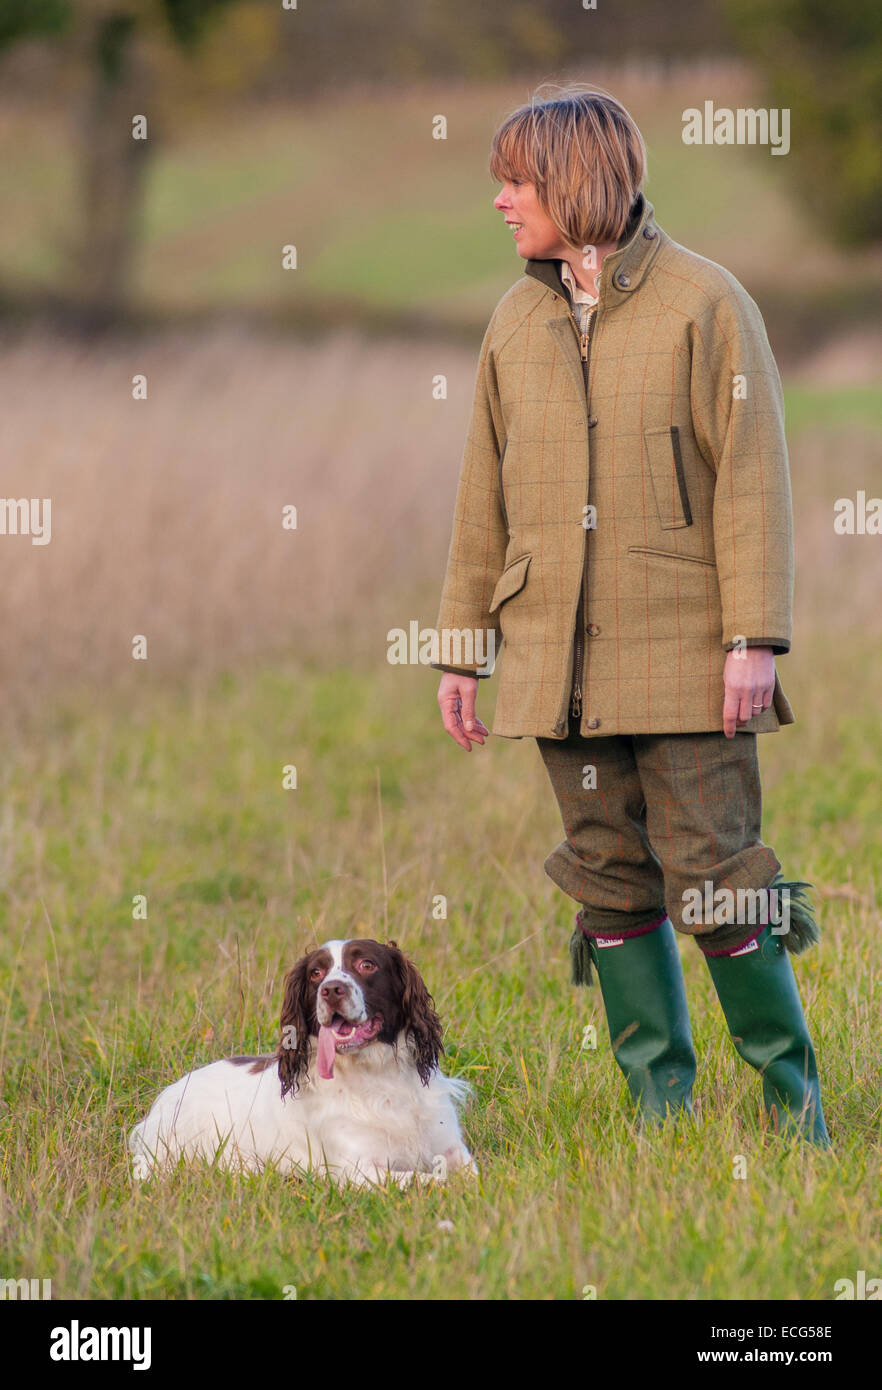 A woman with an English Springer Spaniel in fields Stock Photo